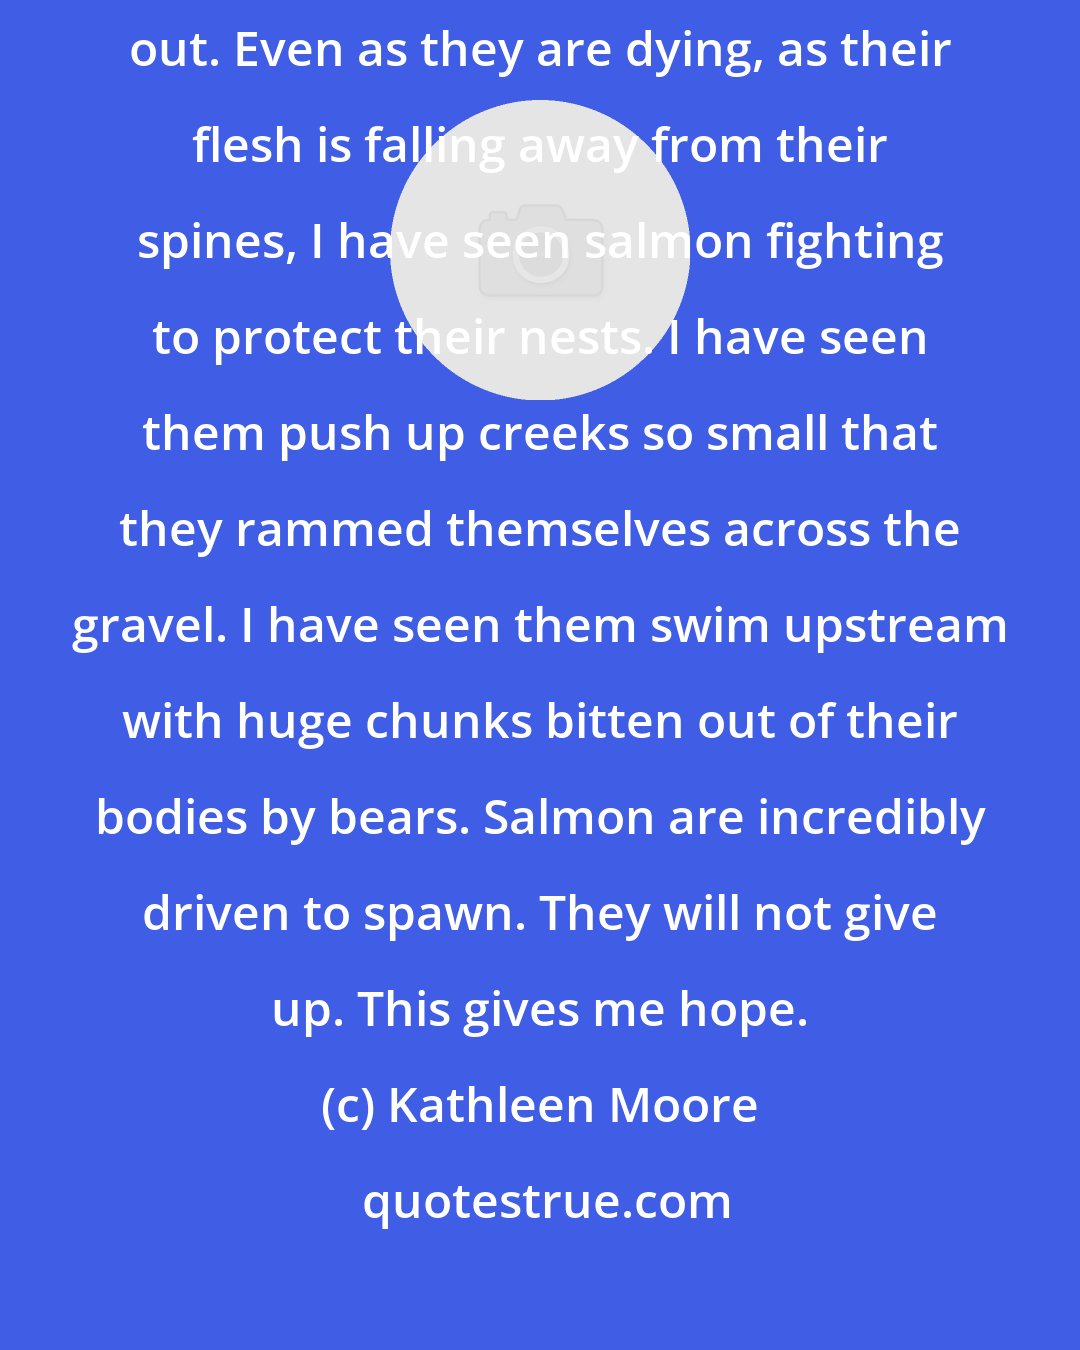 Kathleen Moore: I have seen salmon swimming upstream to spawn even with their eyes pecked out. Even as they are dying, as their flesh is falling away from their spines, I have seen salmon fighting to protect their nests. I have seen them push up creeks so small that they rammed themselves across the gravel. I have seen them swim upstream with huge chunks bitten out of their bodies by bears. Salmon are incredibly driven to spawn. They will not give up. This gives me hope.